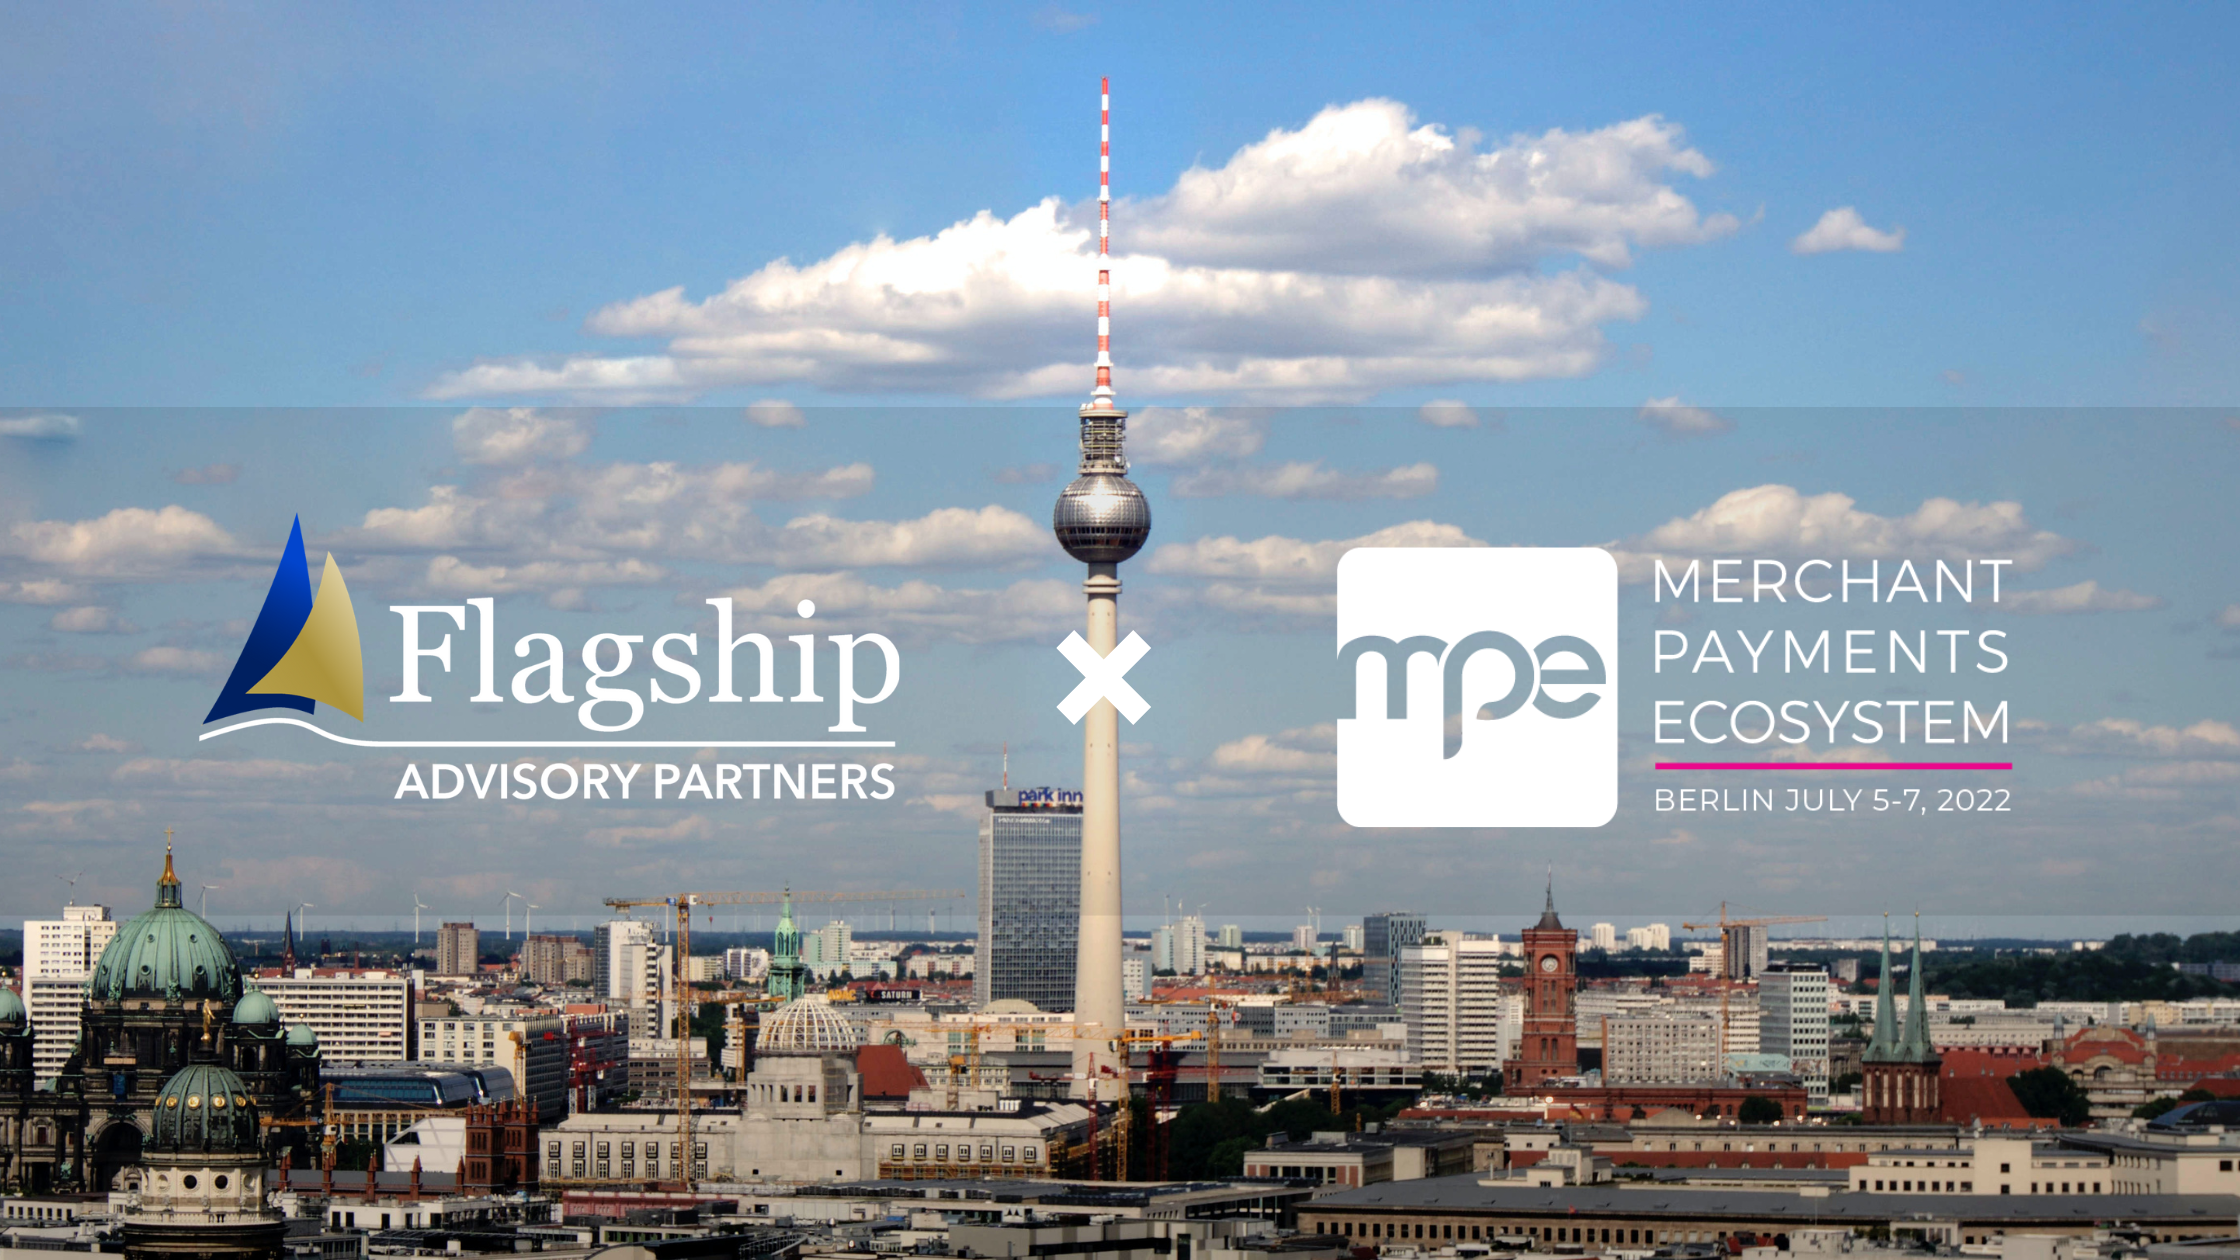 Key Themes and Insights from Merchant Payments Ecosystem (‘MPE’) Berlin, 5 - 7 July 2022